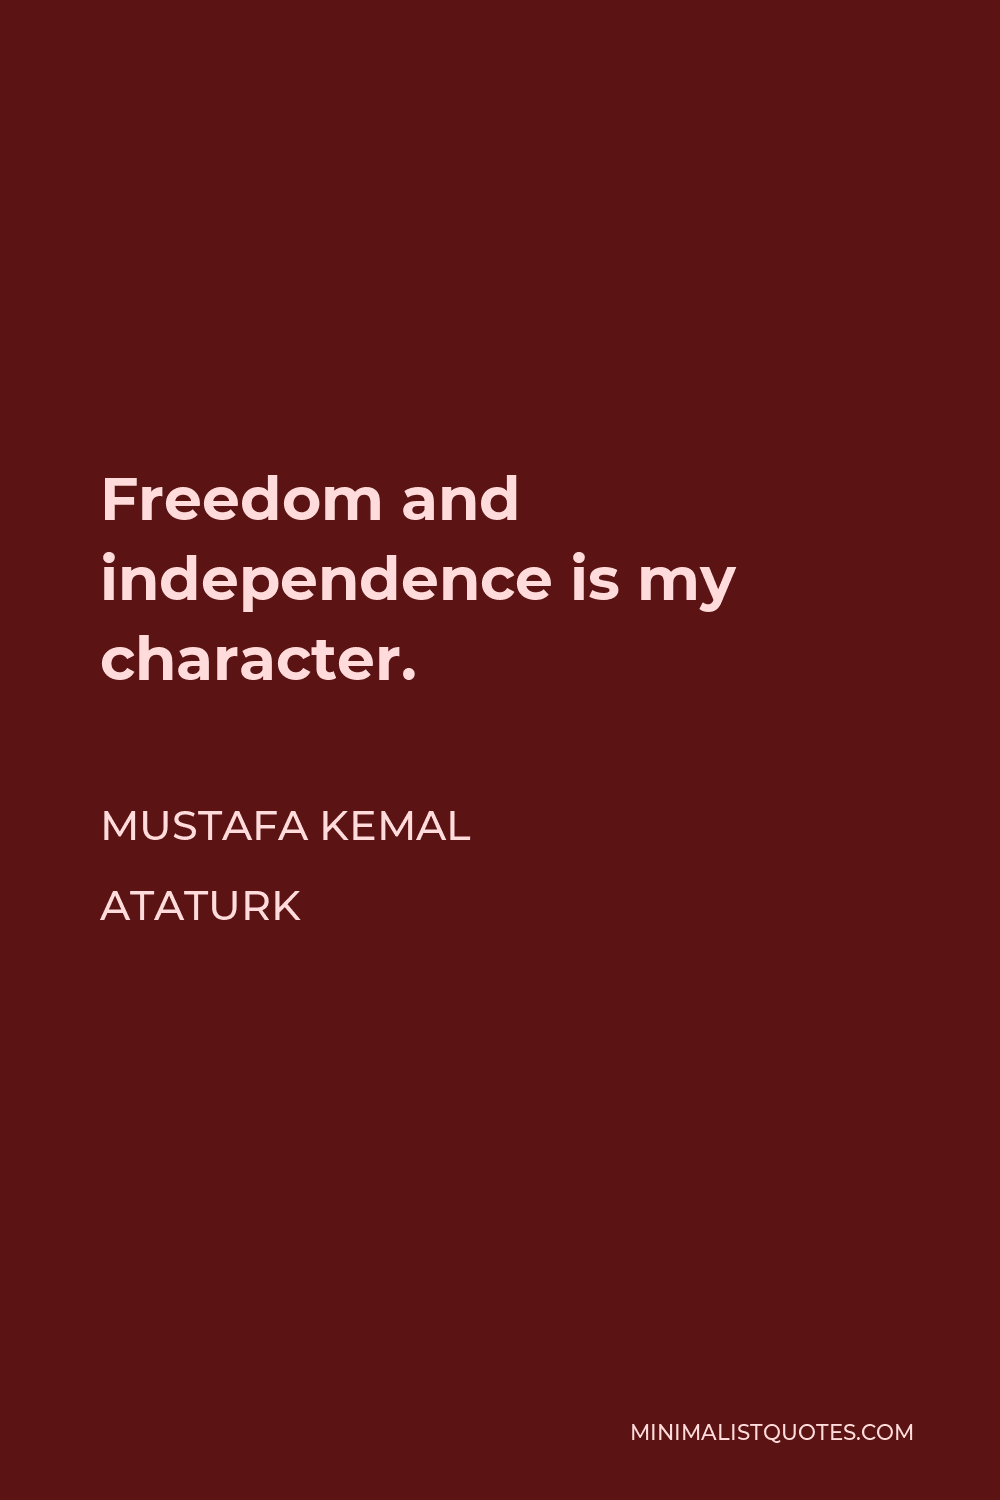 Mustafa Kemal Ataturk Quote - Freedom and independence is my character.